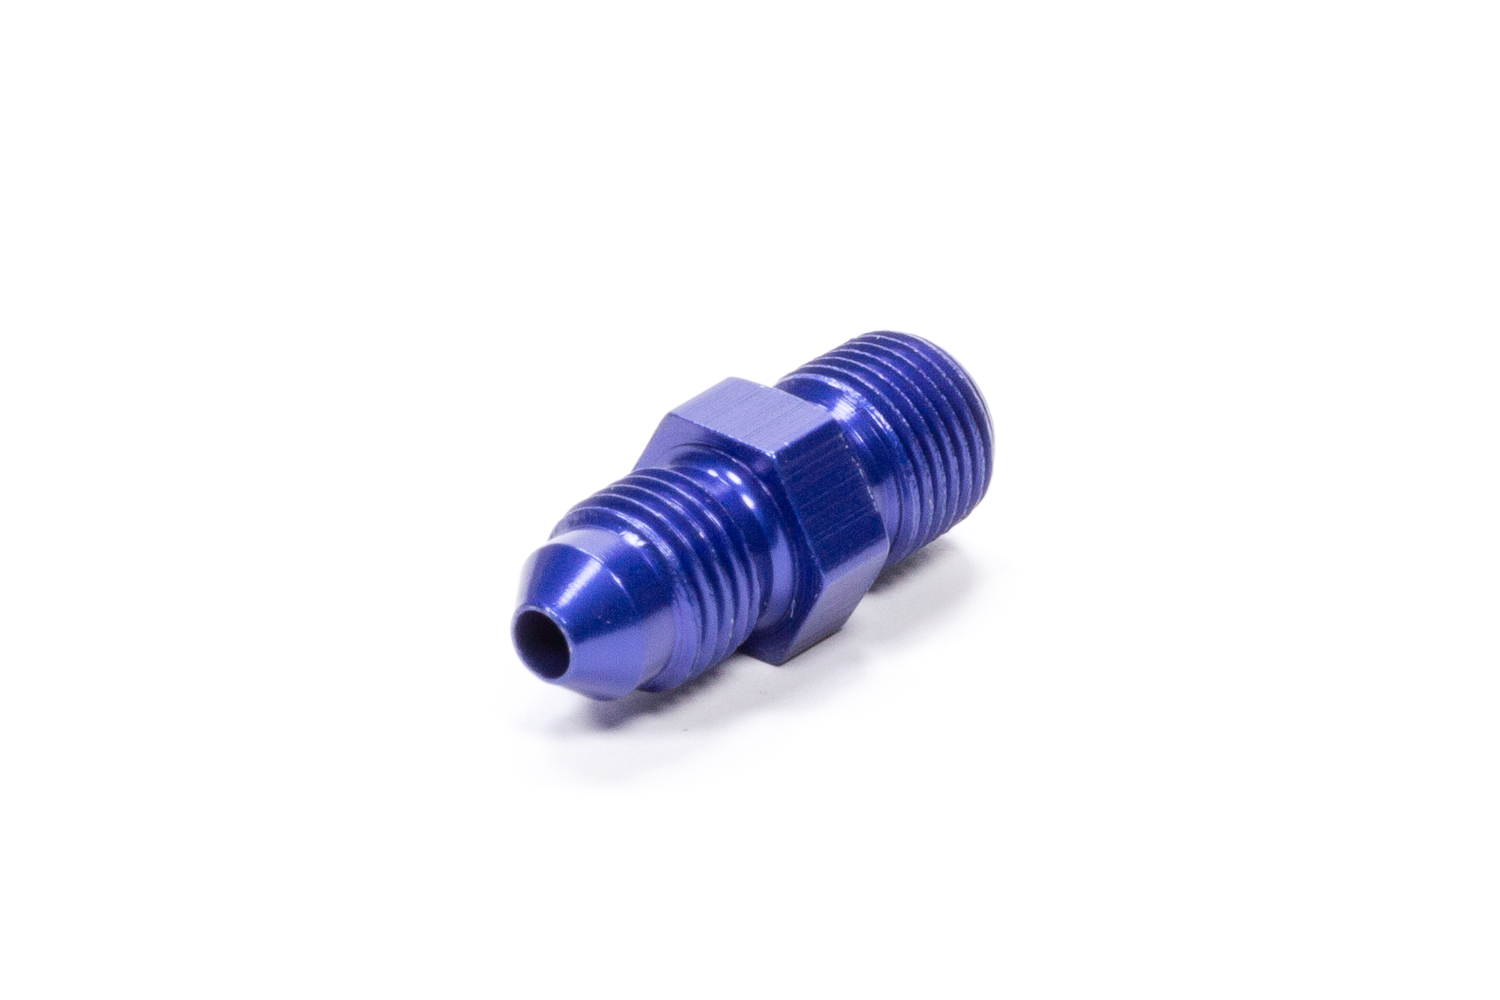 Fragola 481603 Fitting, Adapter, Straight, 3 AN Male to 1/8 in NPT Male, Aluminum, Blue Anodized, Each